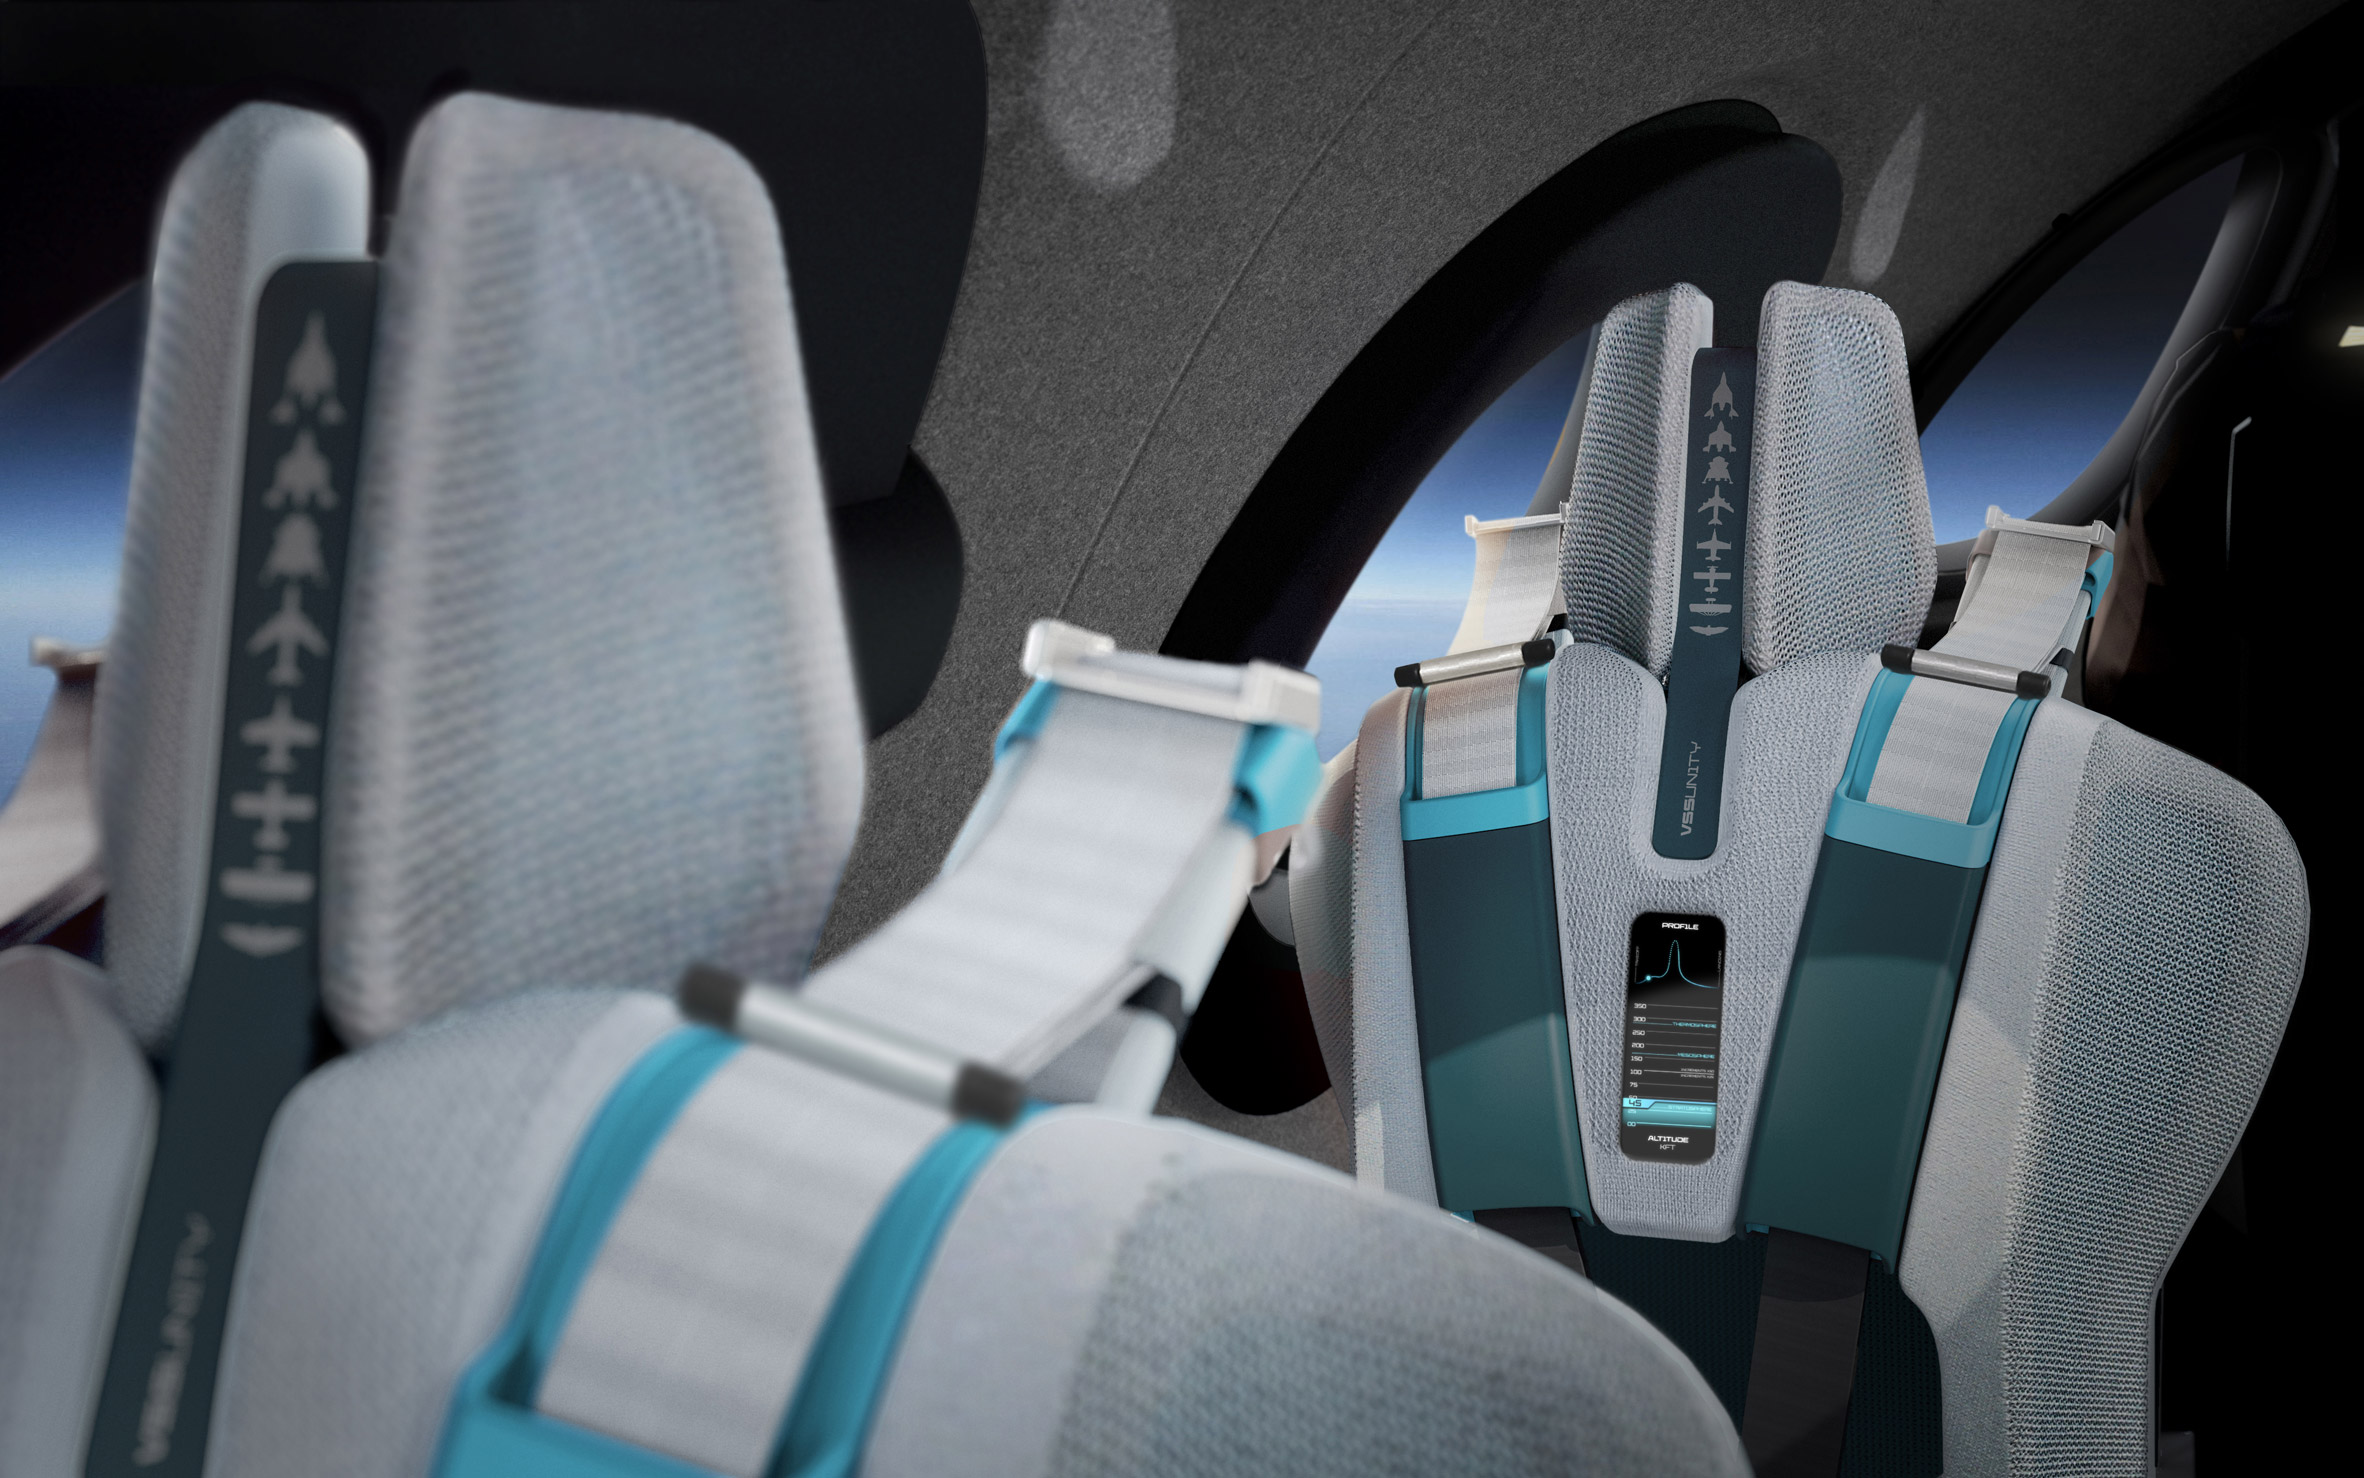 Virgin Galactic unveils SpaceshipTwo cabin interior designed with Seymourpowell